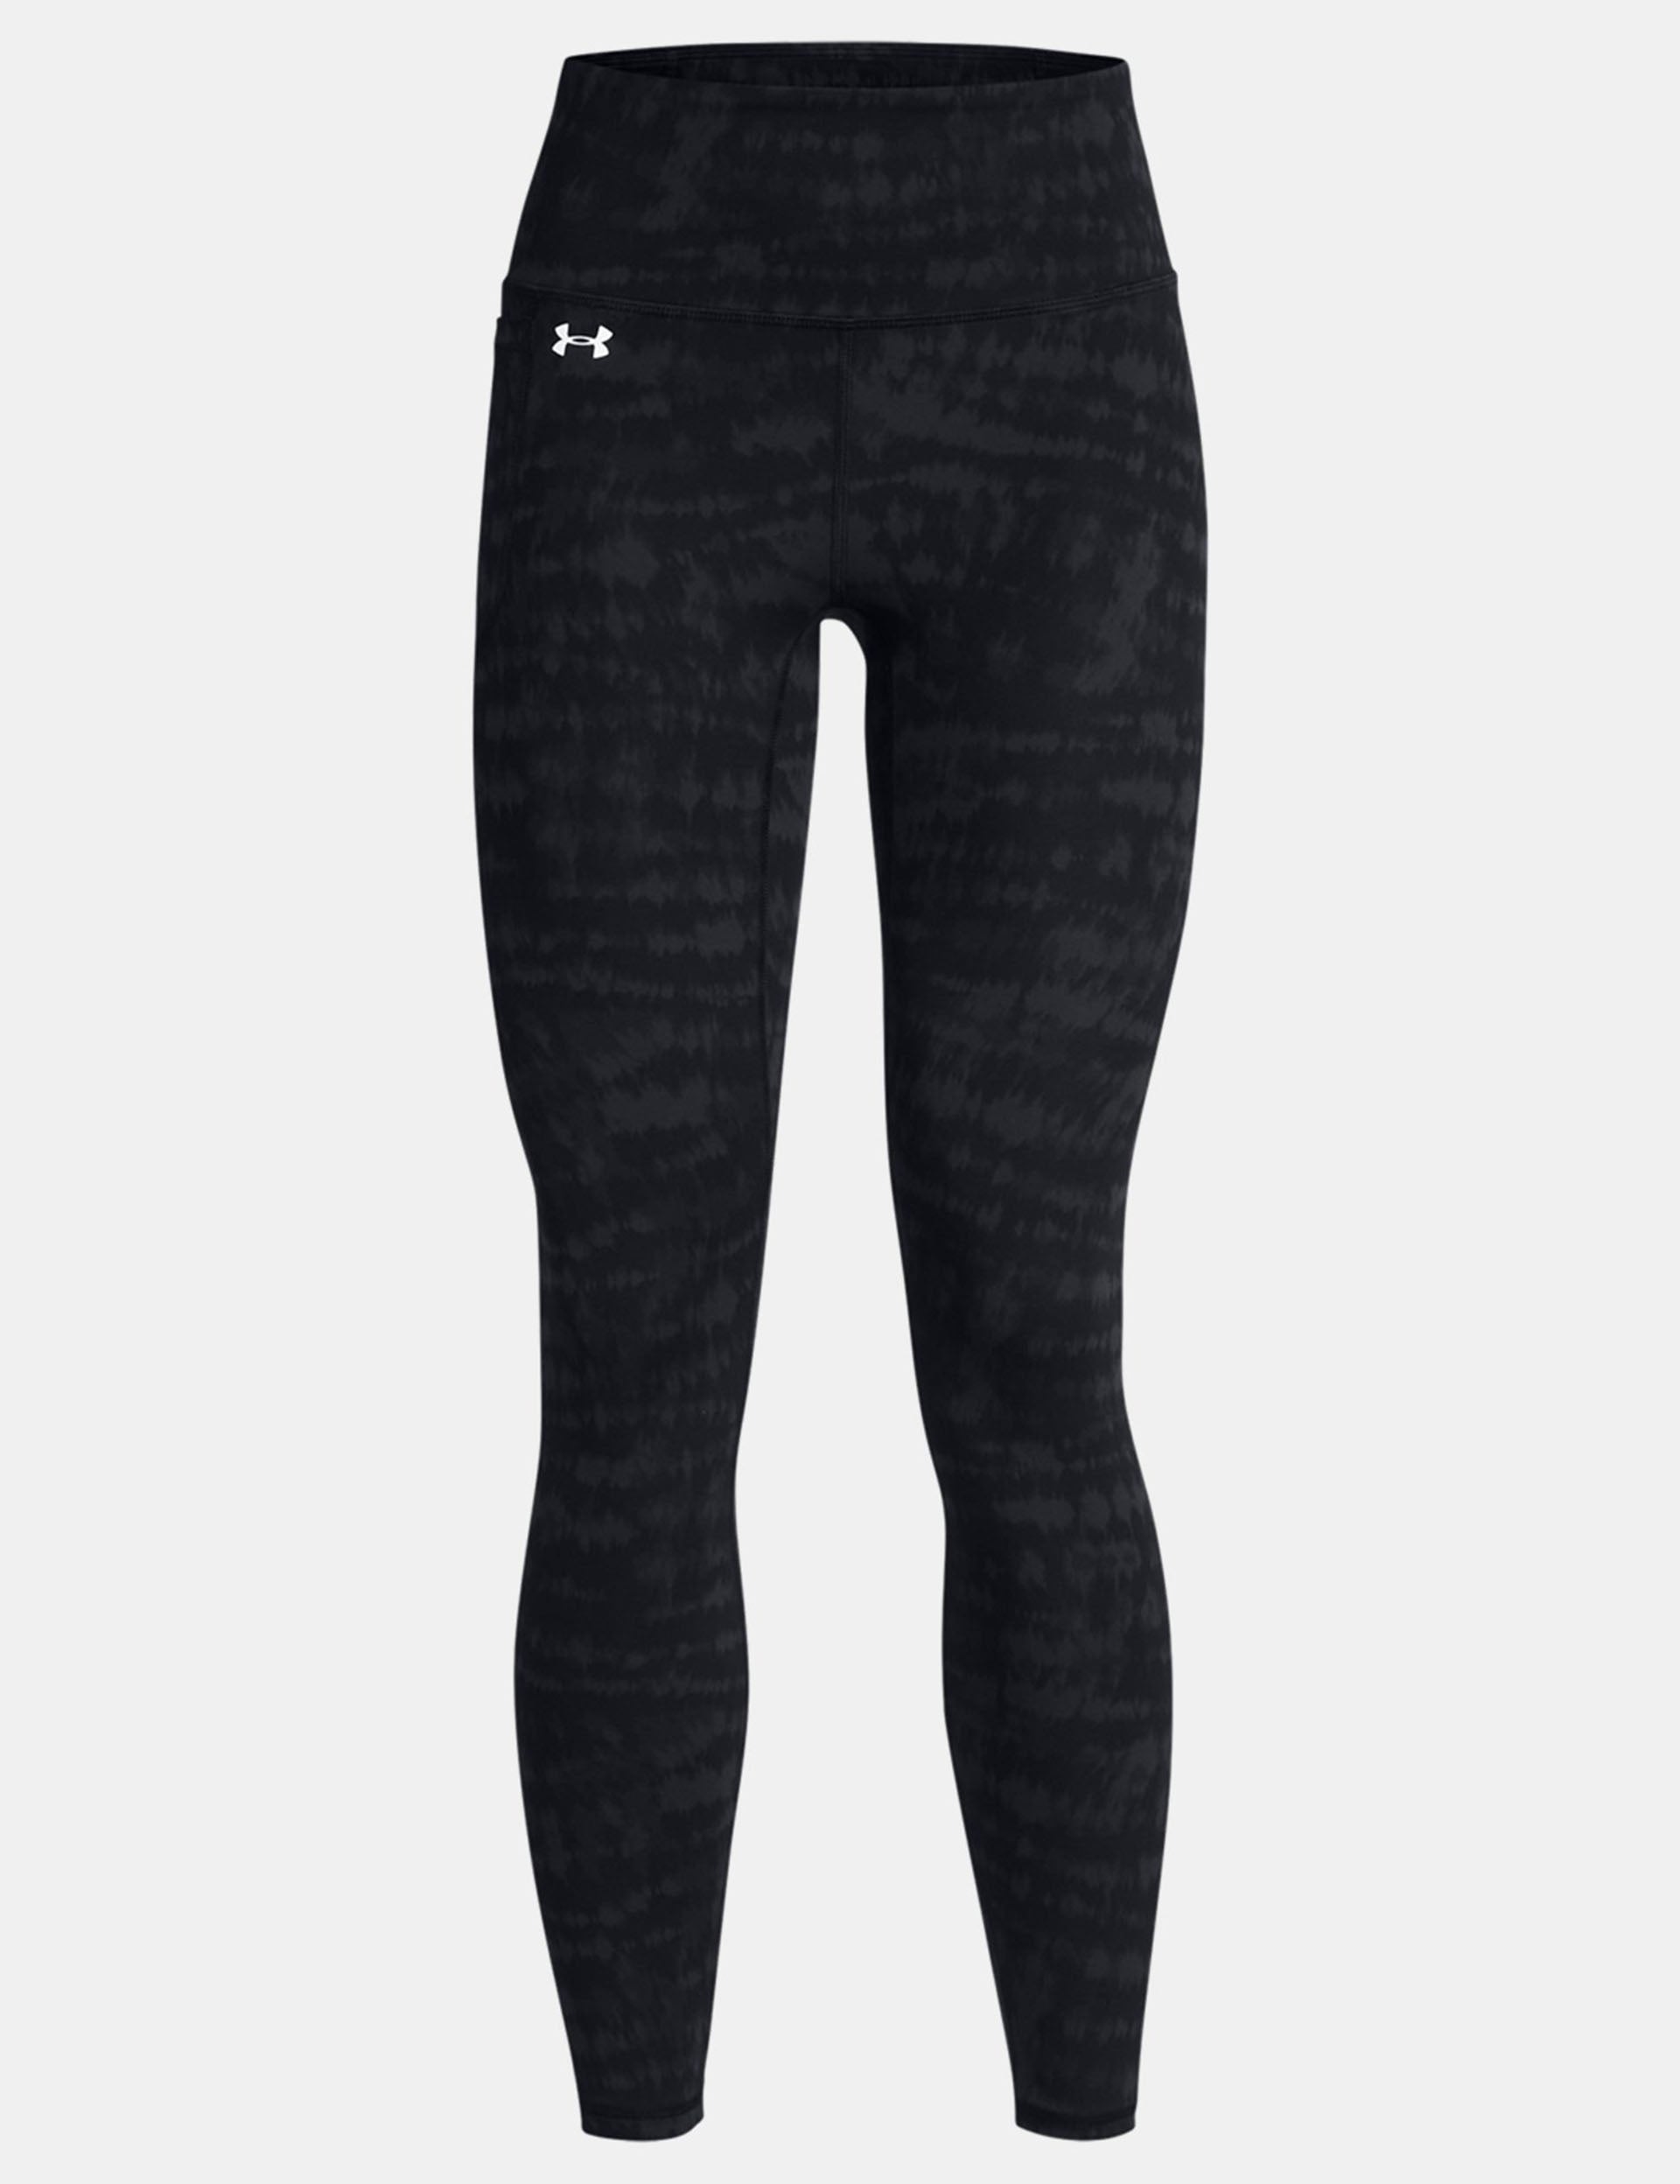 Under Armour Women's Cosy Blocked Tights (Black/White, Size XL)